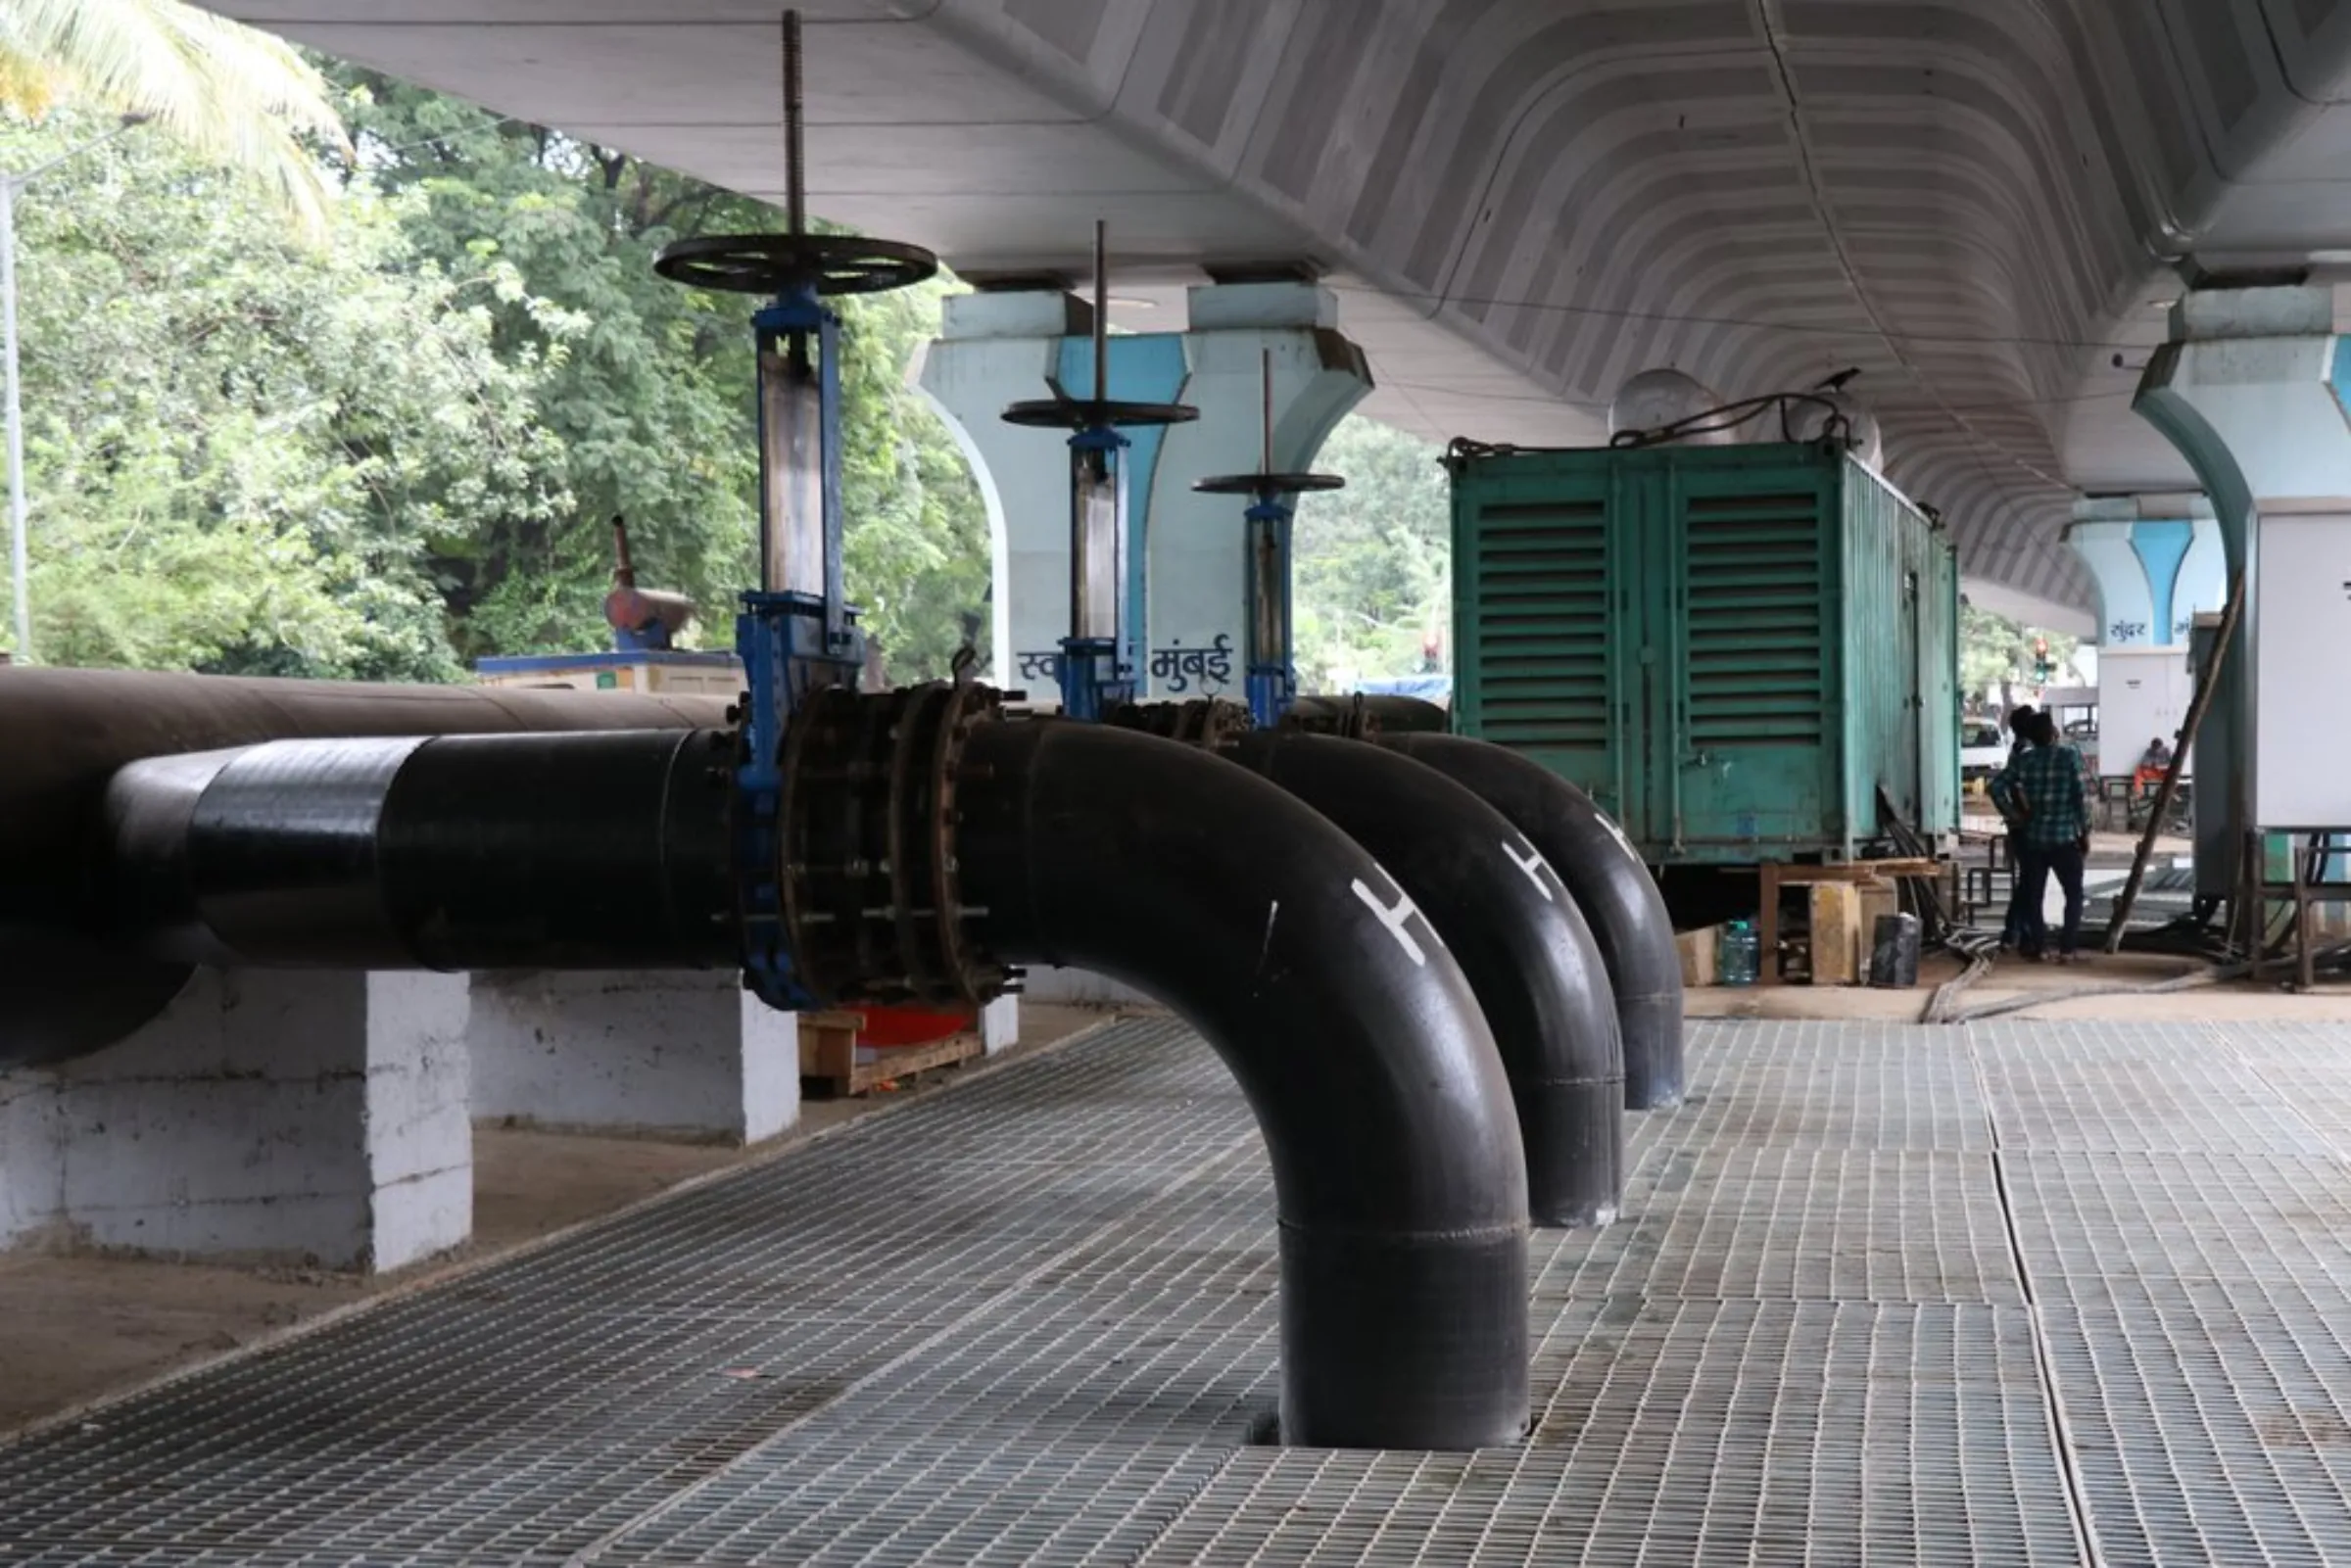 Newly installed underground water pumps, designed to carry away excess water and prevent flooding, sit under a road flyover at Hindmata in Mumbai, India, September 7, 2021